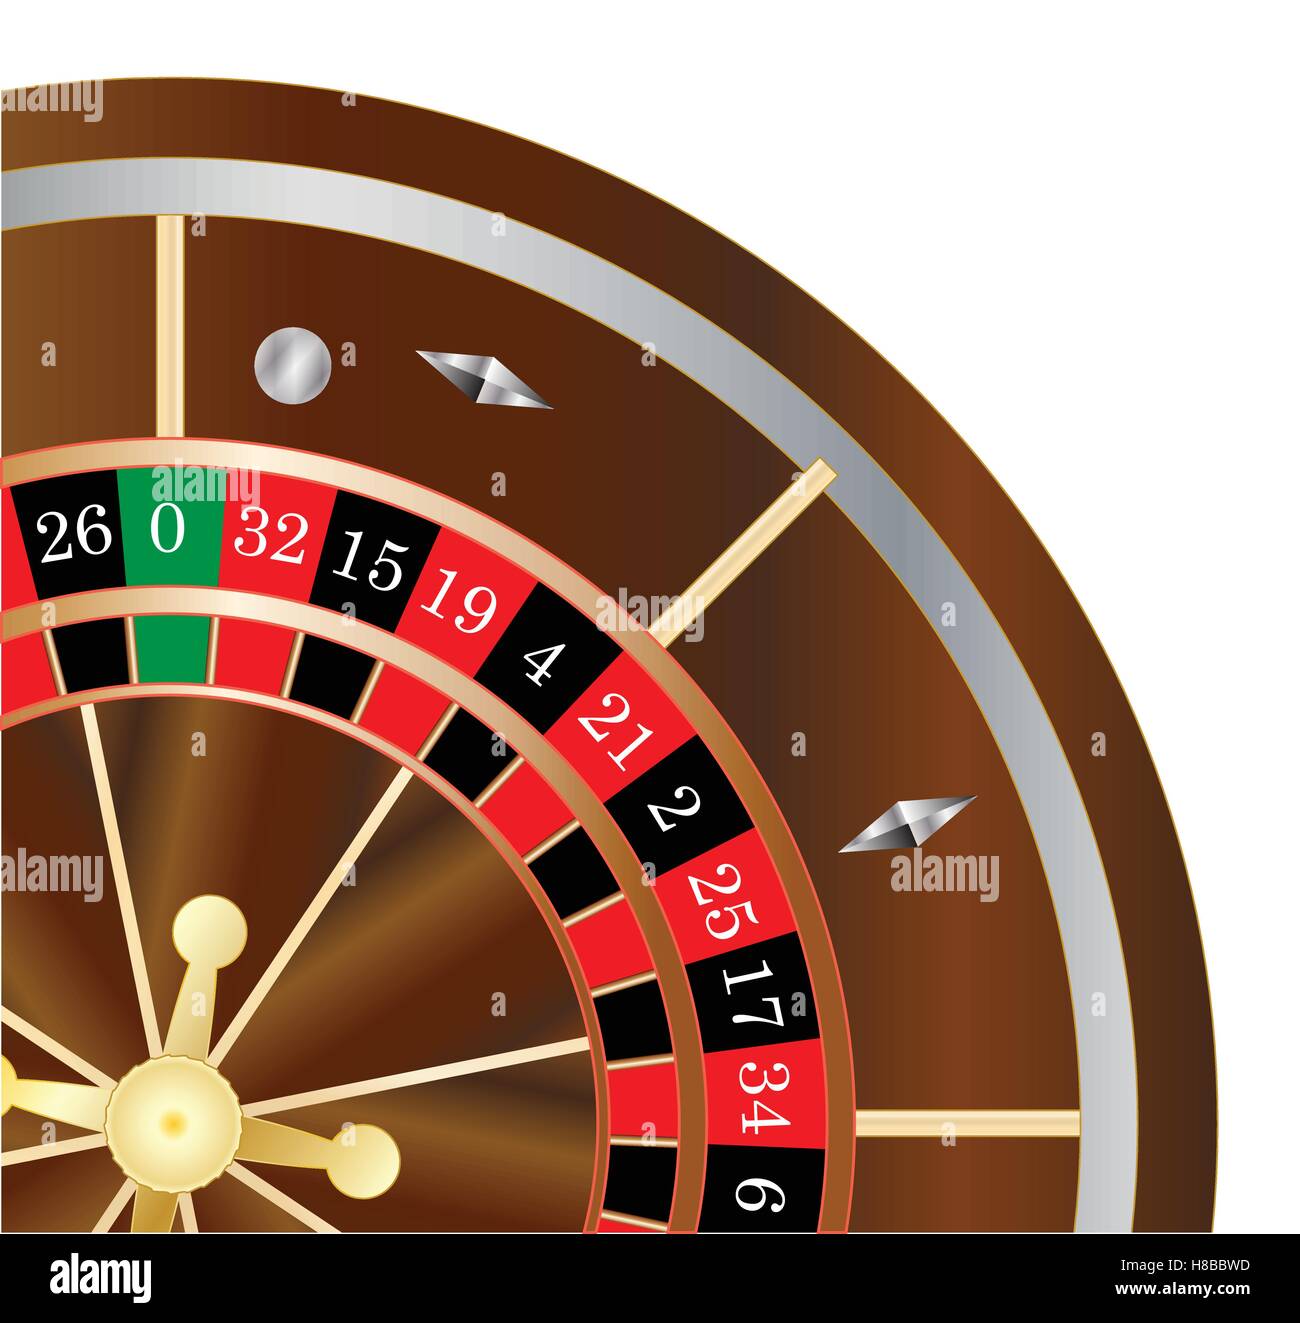 A typical roulette wheel with the silver ball in motion Stock Vector